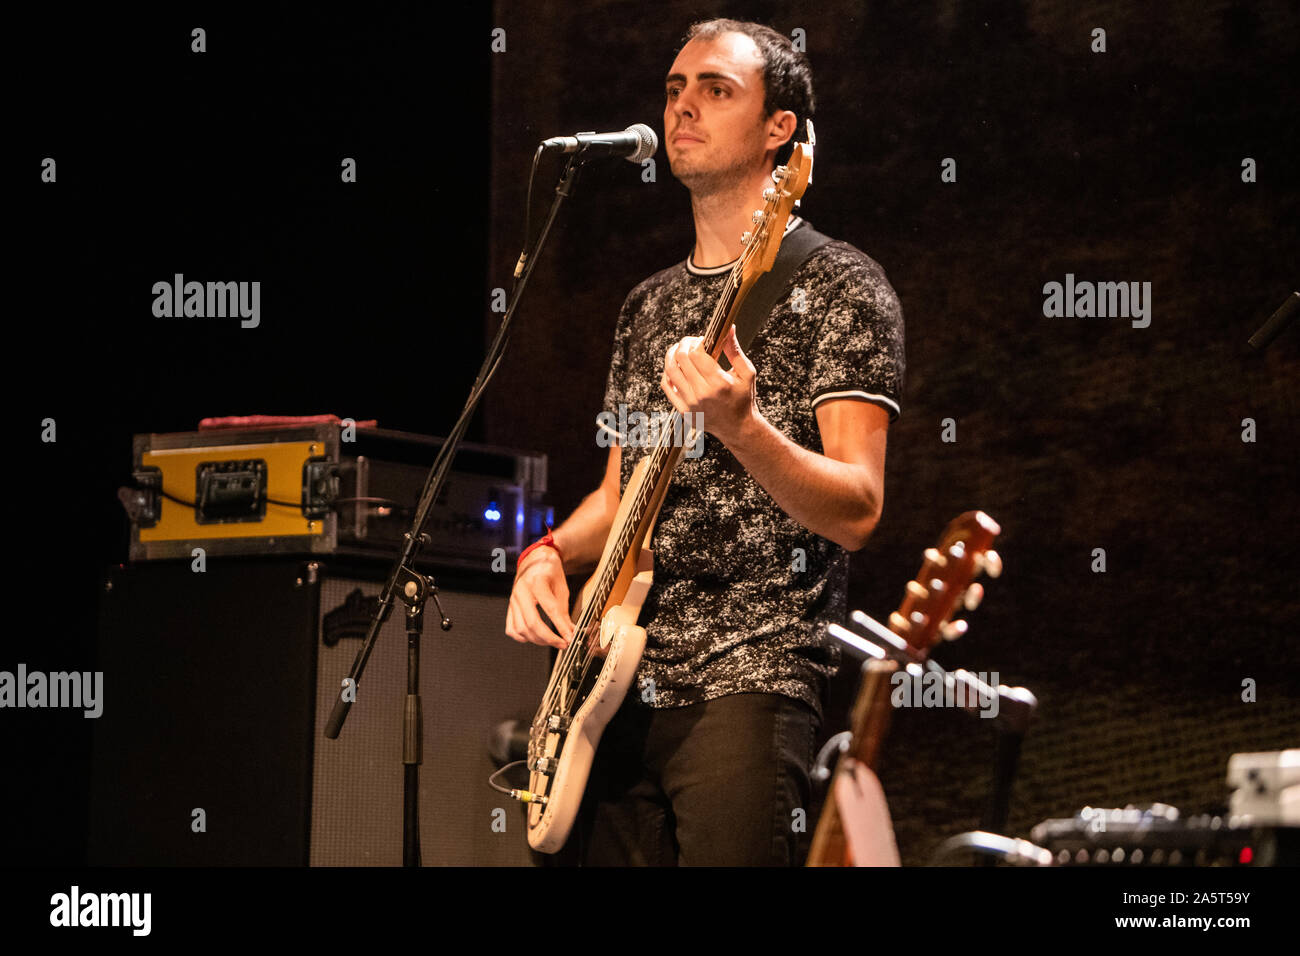 Milan Italy. 21 October 2019. The American alternative rock band CAKE performs live on stage at Alcatraz to present the imminent new album probably titled 'Age Of Aquarius'. Stock Photo